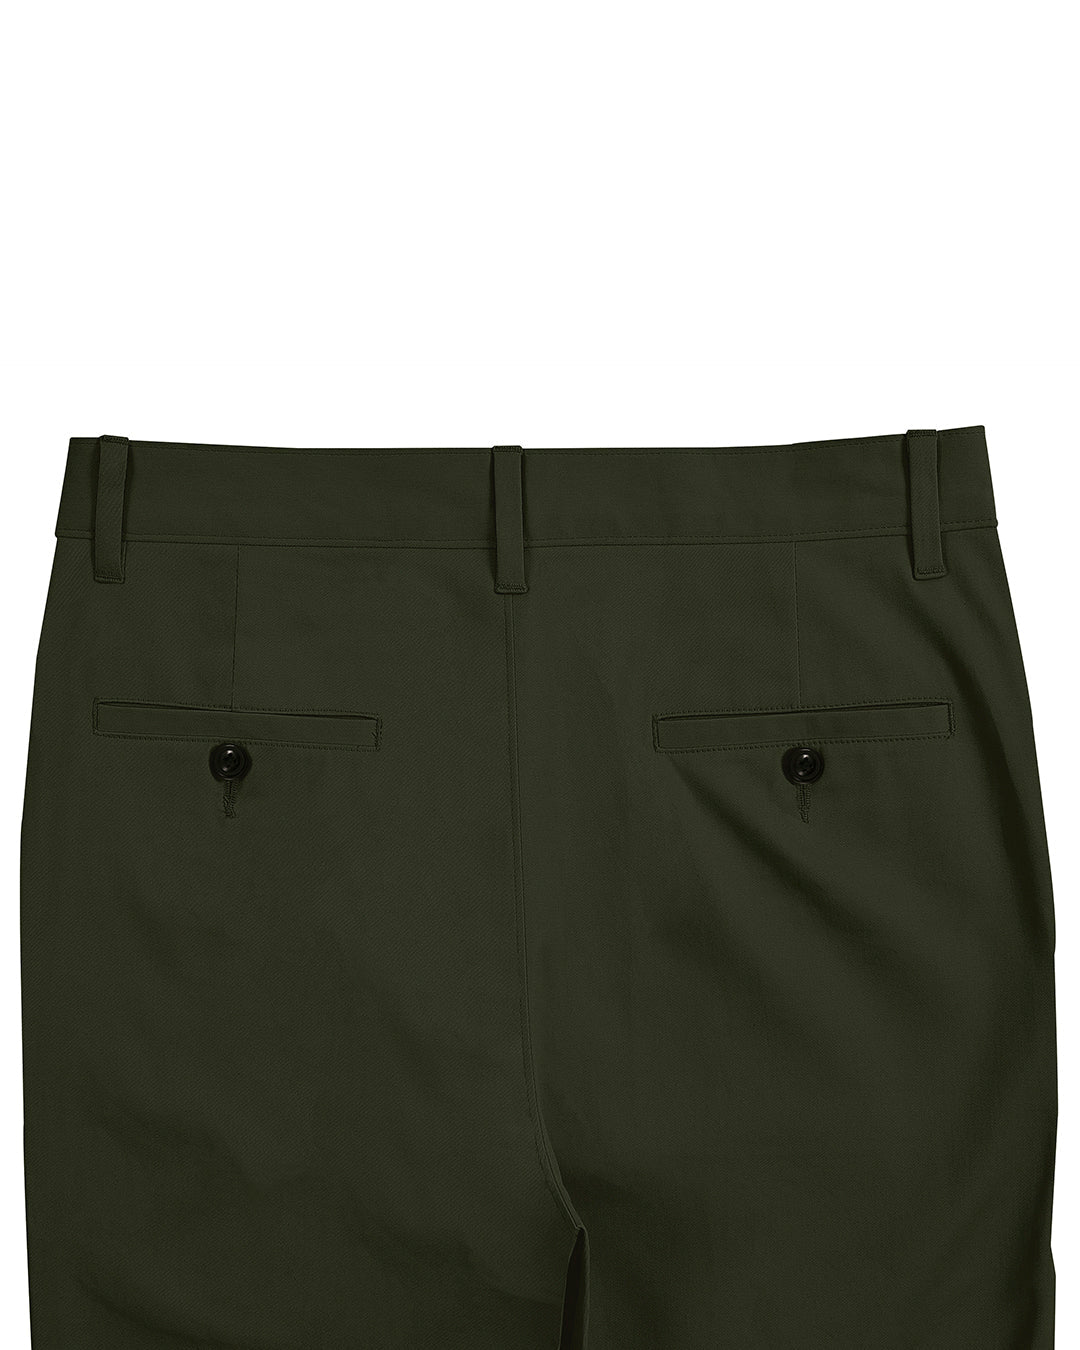 Back view of custom Genoa Chino pants for men by Luxire in olive green